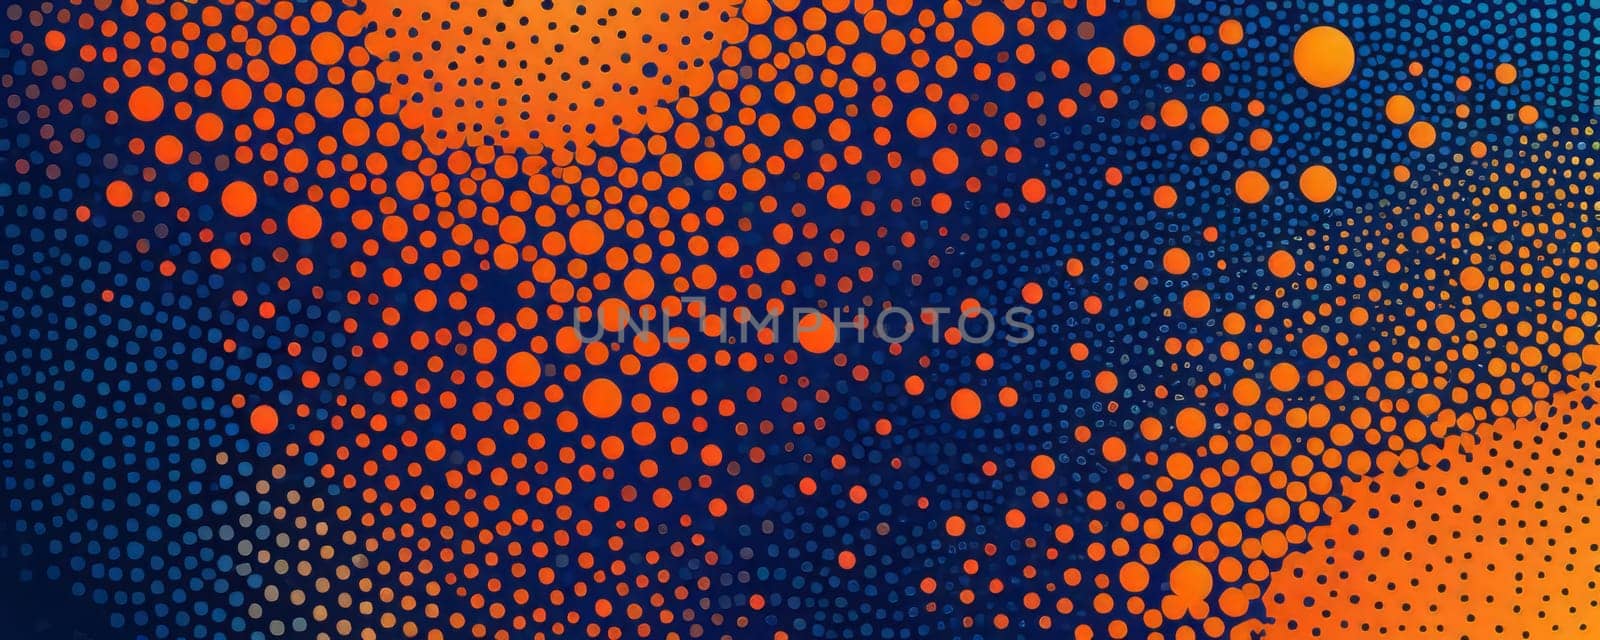 Dotted Shapes in Orange Dark blue by nkotlyar